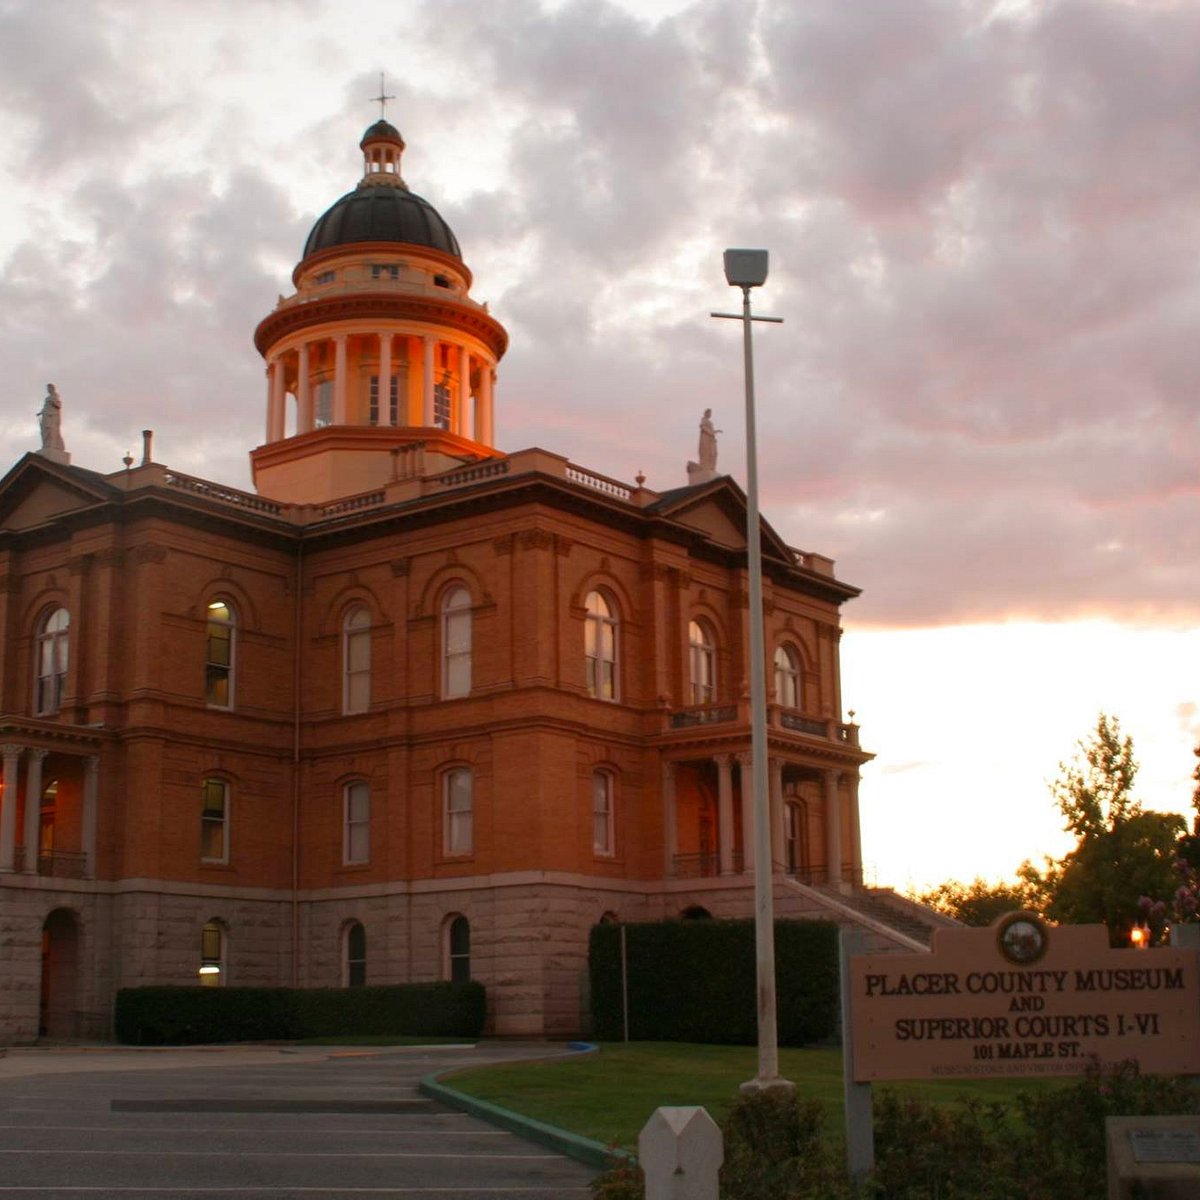 Placer County Courthouse 오번 Placer County Courthouse의 리뷰 트립어드바이저